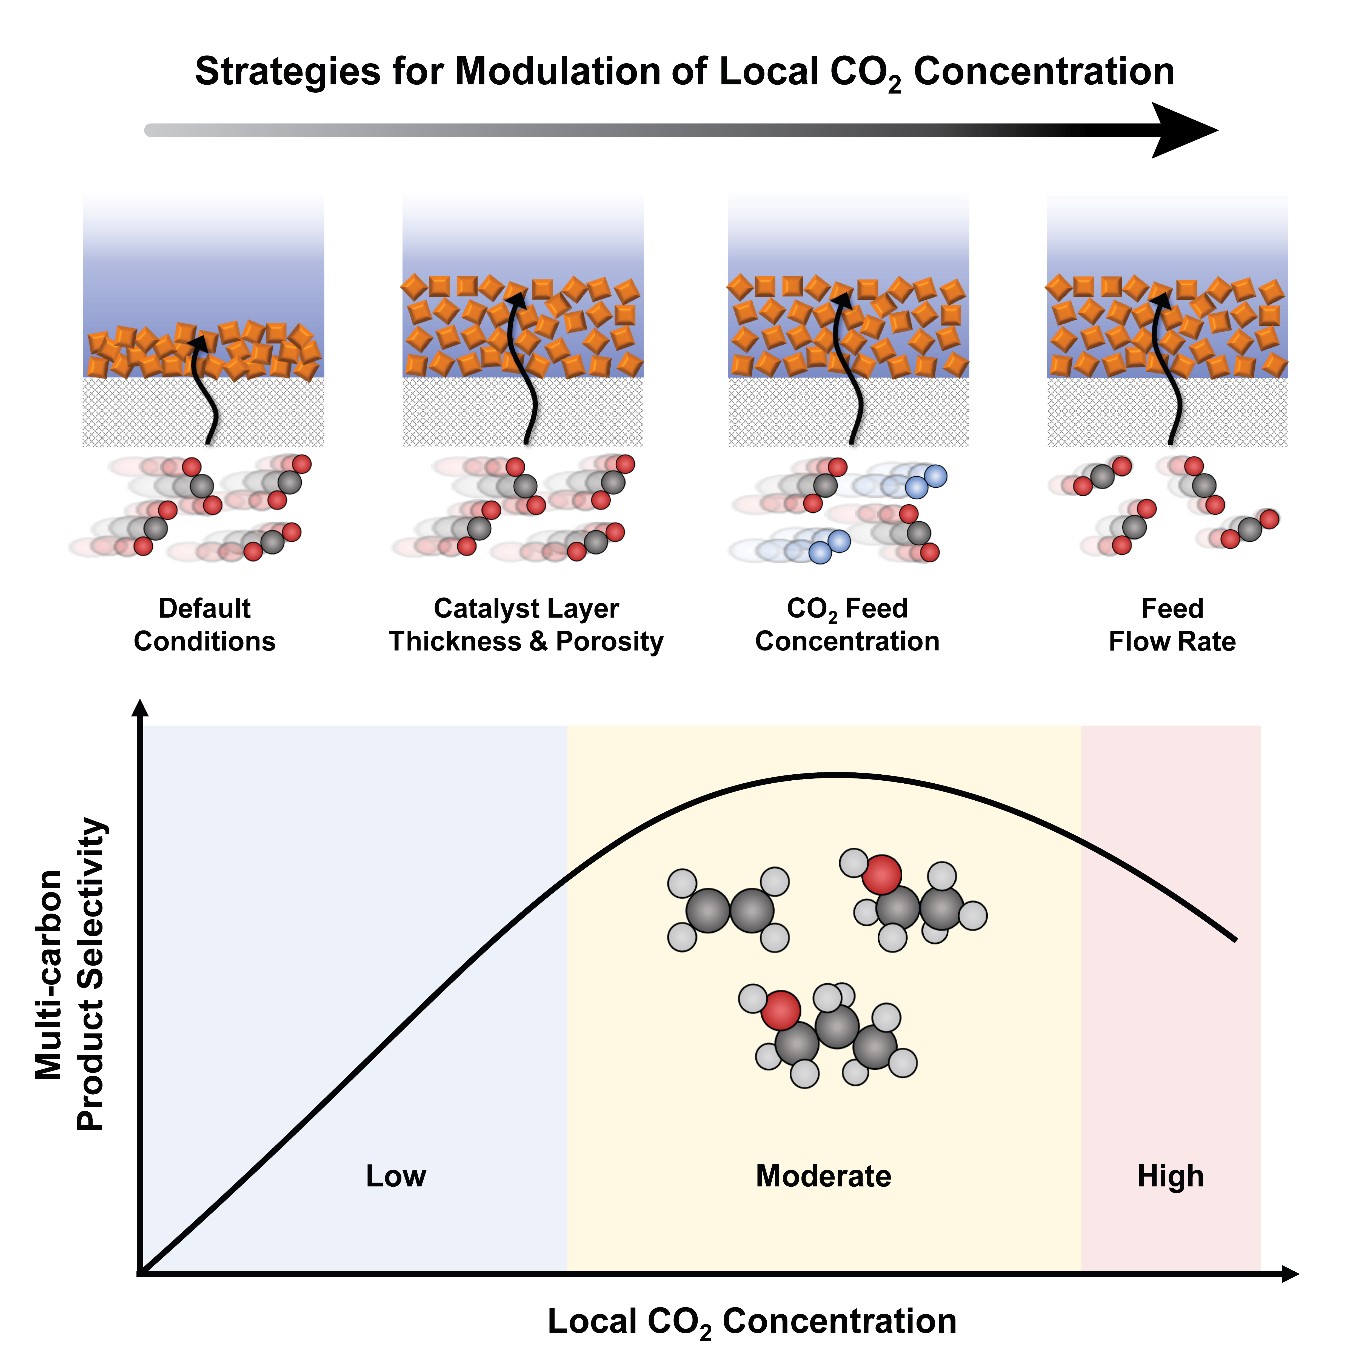 Figure. Three strategies employed in this study to modulate local CO2 concentration in a catalyst layer (top) and the relationship between local CO2 concentration and the selectivity for multi-carbon products (bottom). Note that maximum selectivity is achieved at a moderate local CO2 concentration.